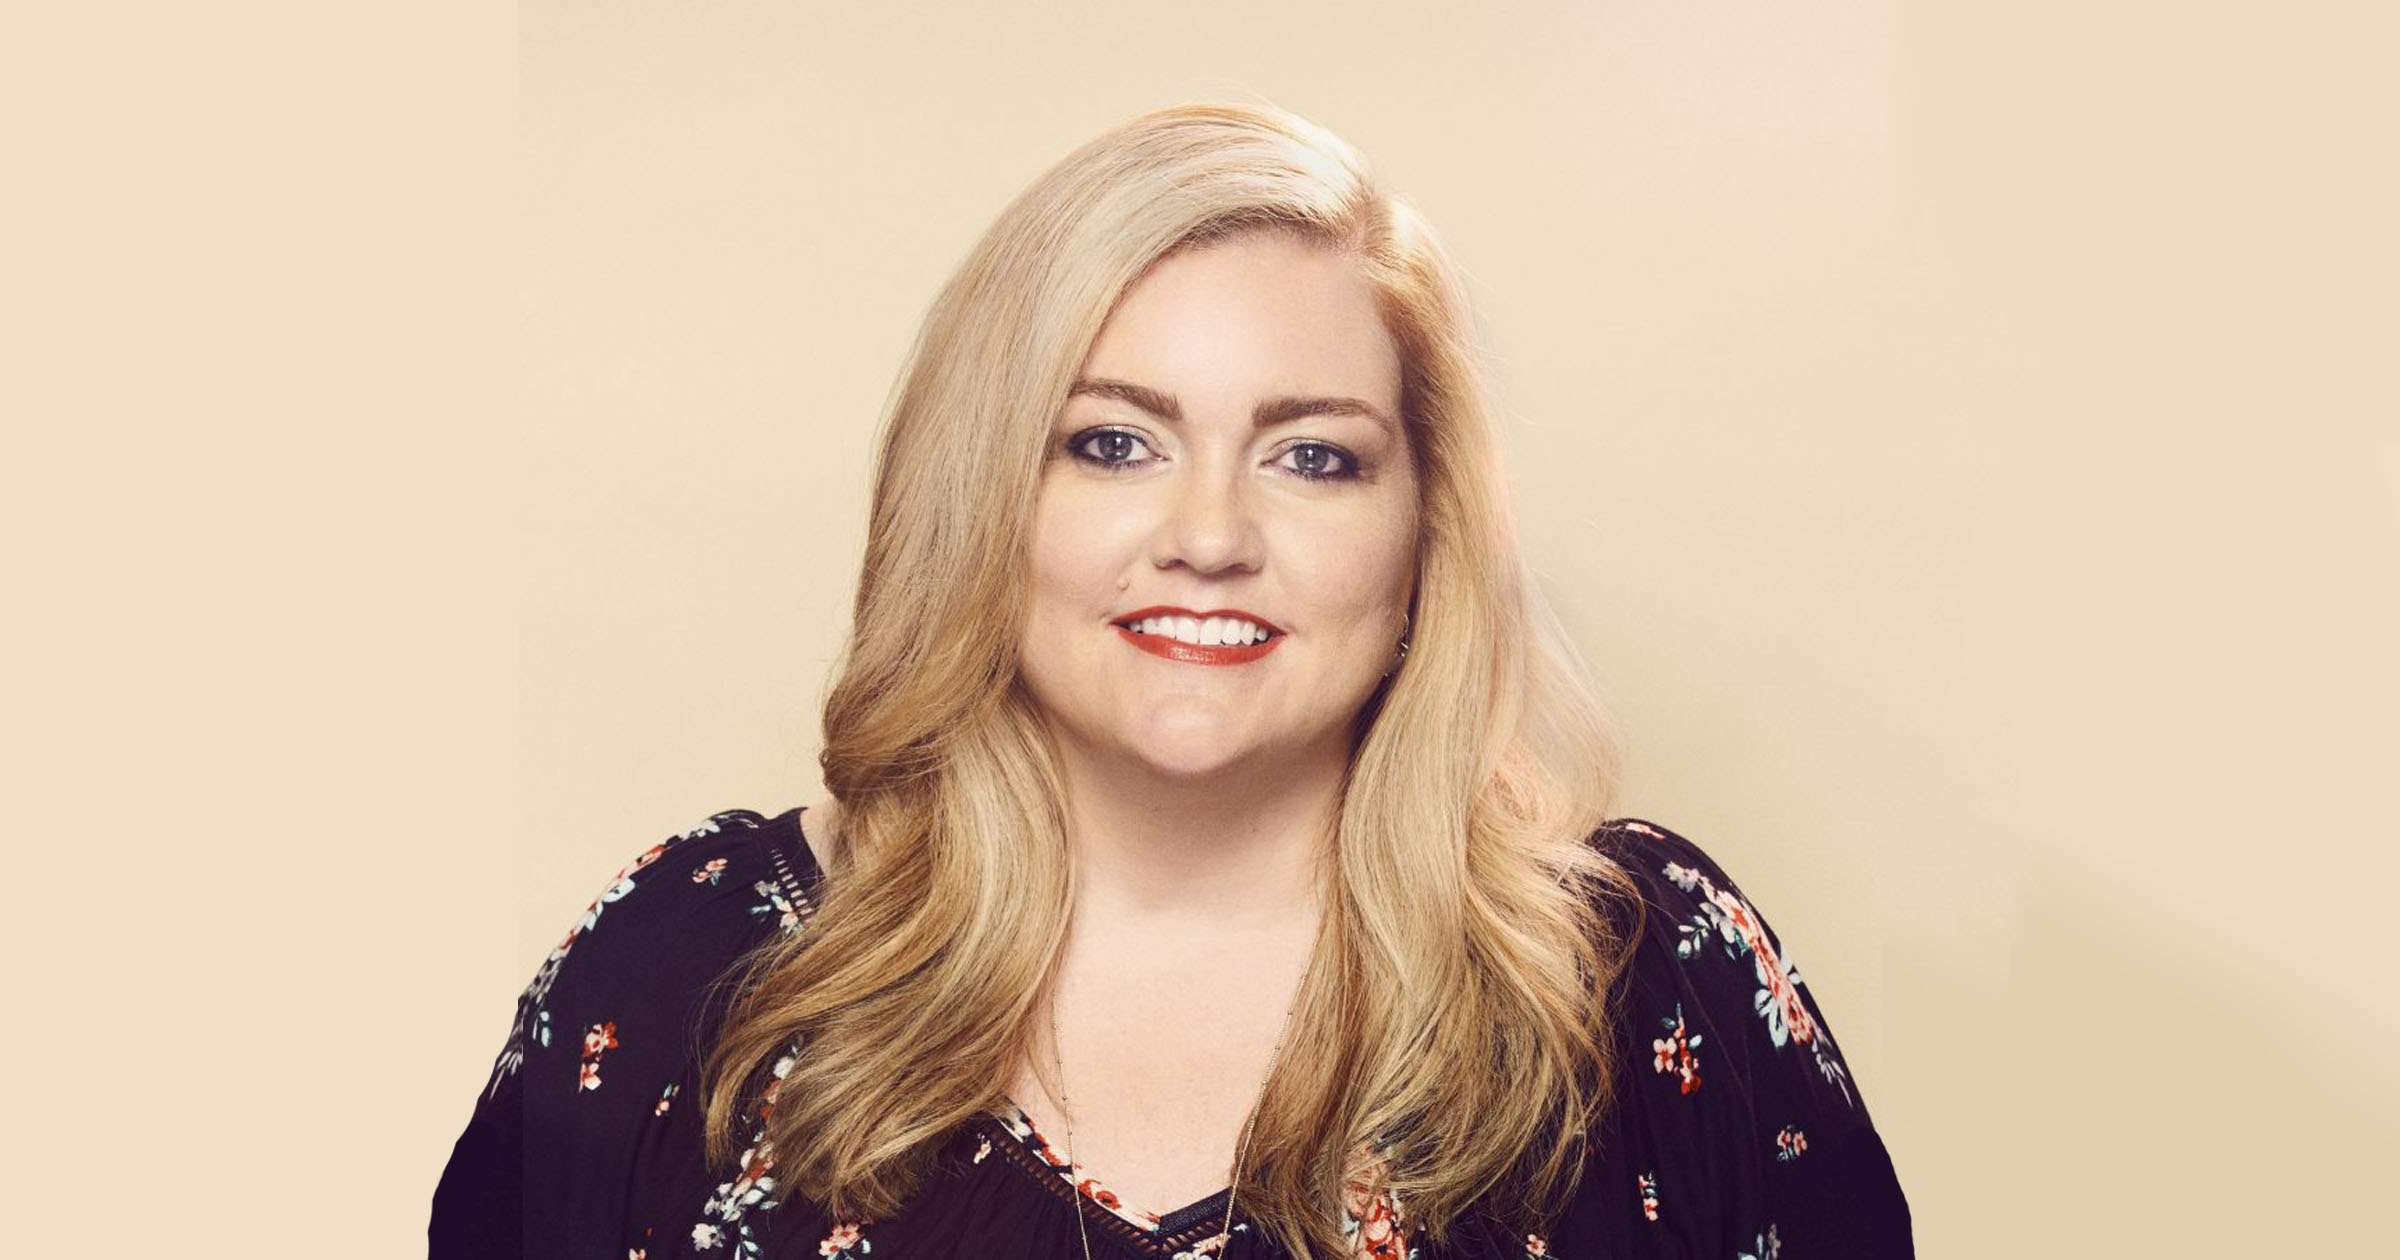 How Colleen Hoover Became The Queen Of BookTok